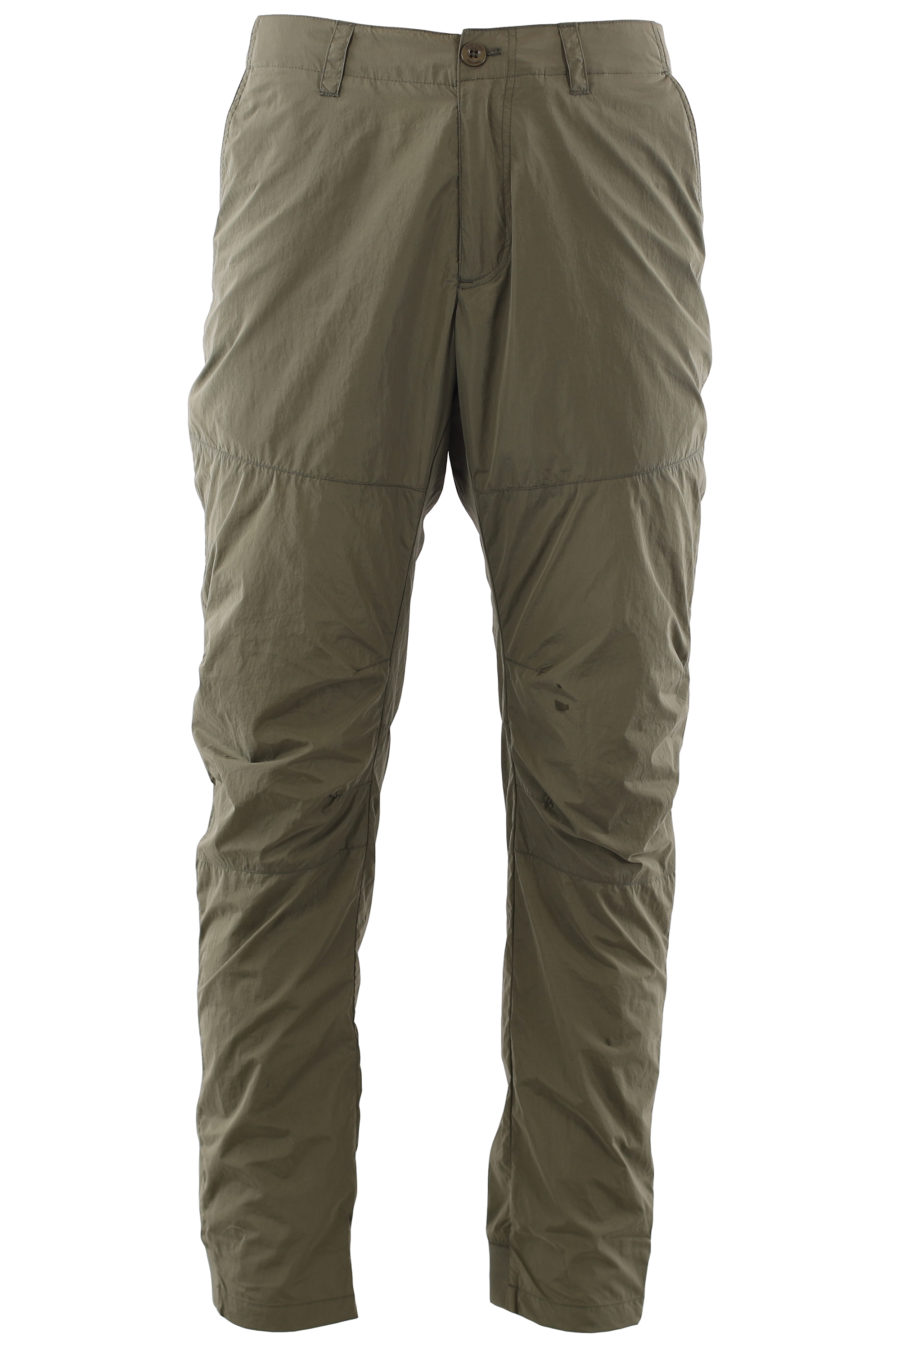 Tactical" long trousers military green - IMG 6662